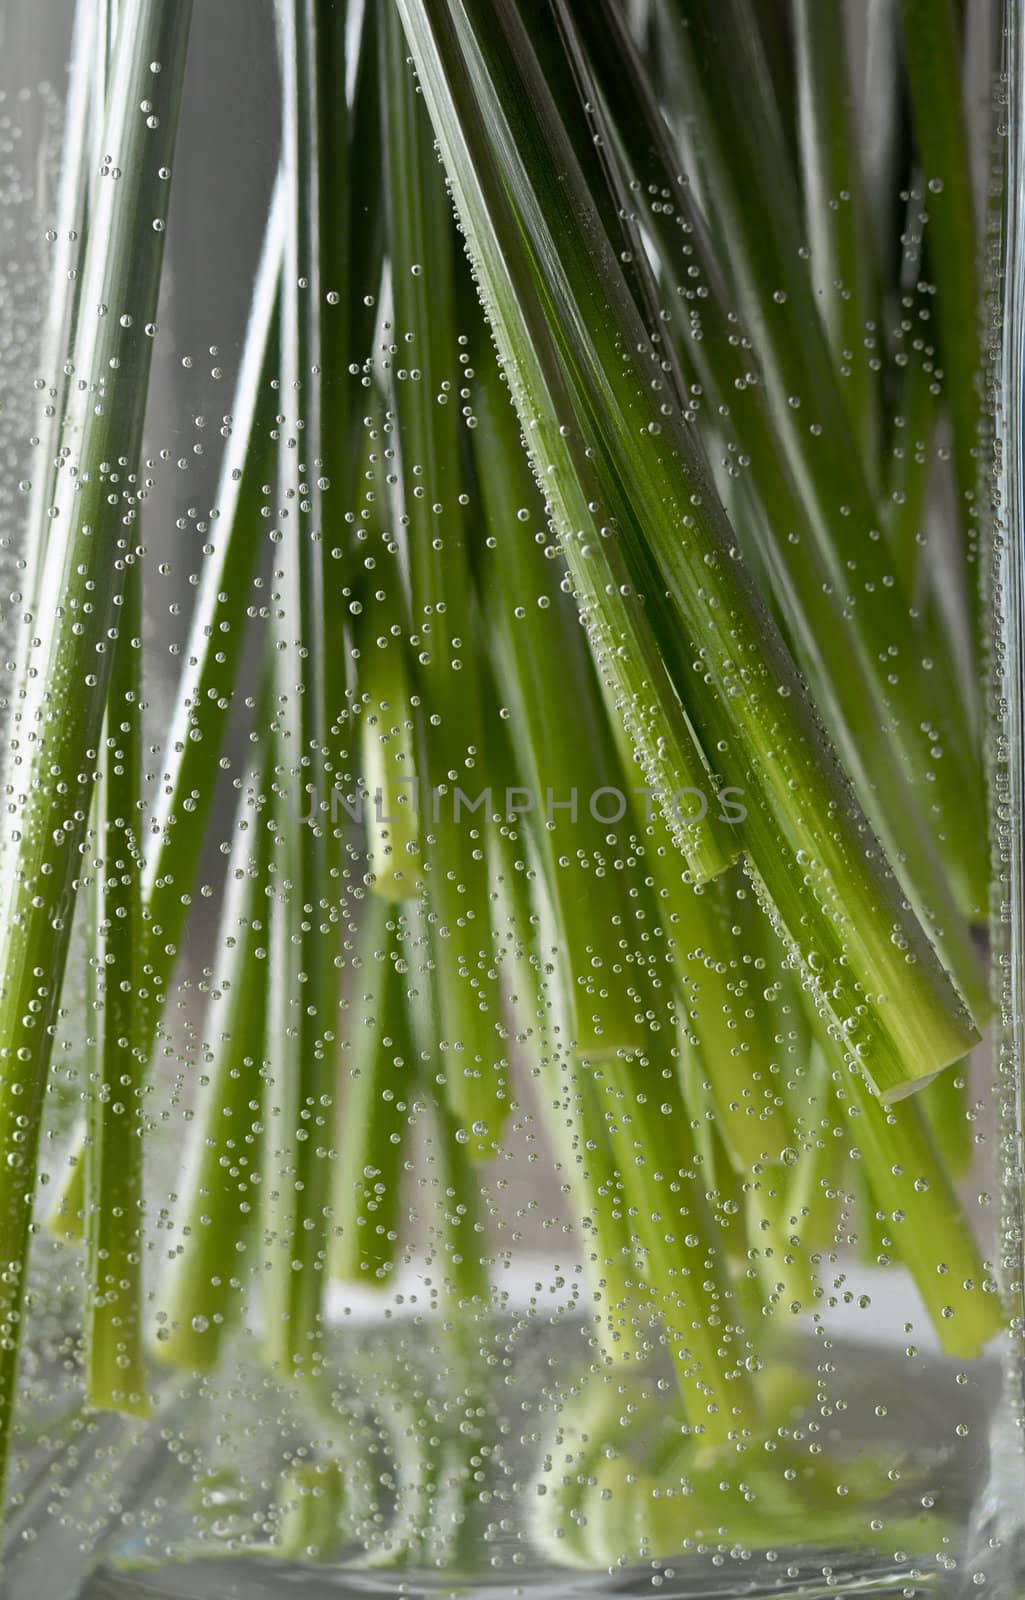 green stems in a glass vase, surrounded by air bubbles
